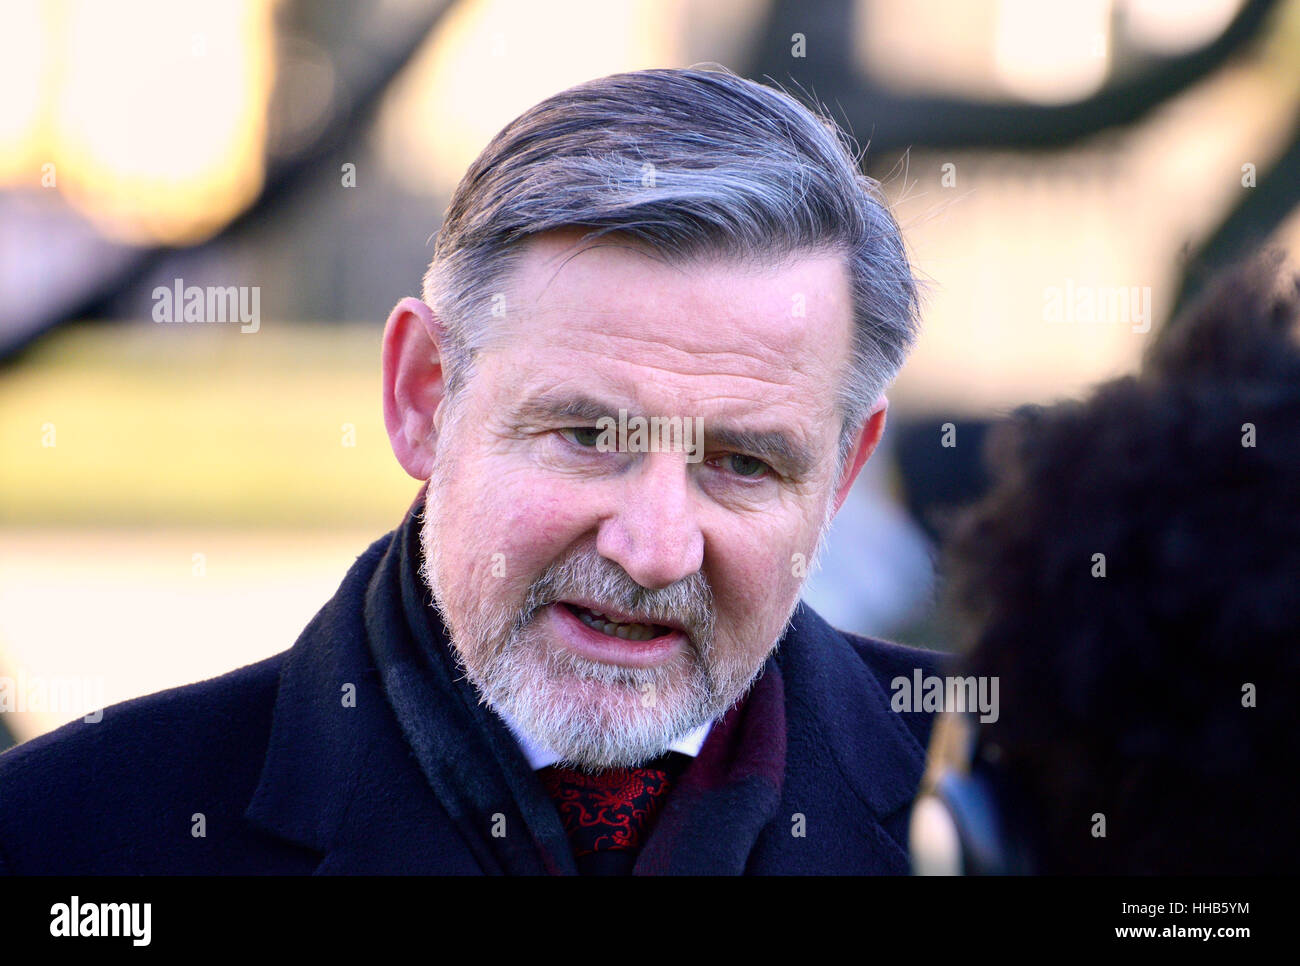 Barry Gardiner MP (Labour, Brent North) Shadow Secretary of State for International Trade, being interviewed after Theresa May's speech on Brexit nego Stock Photo